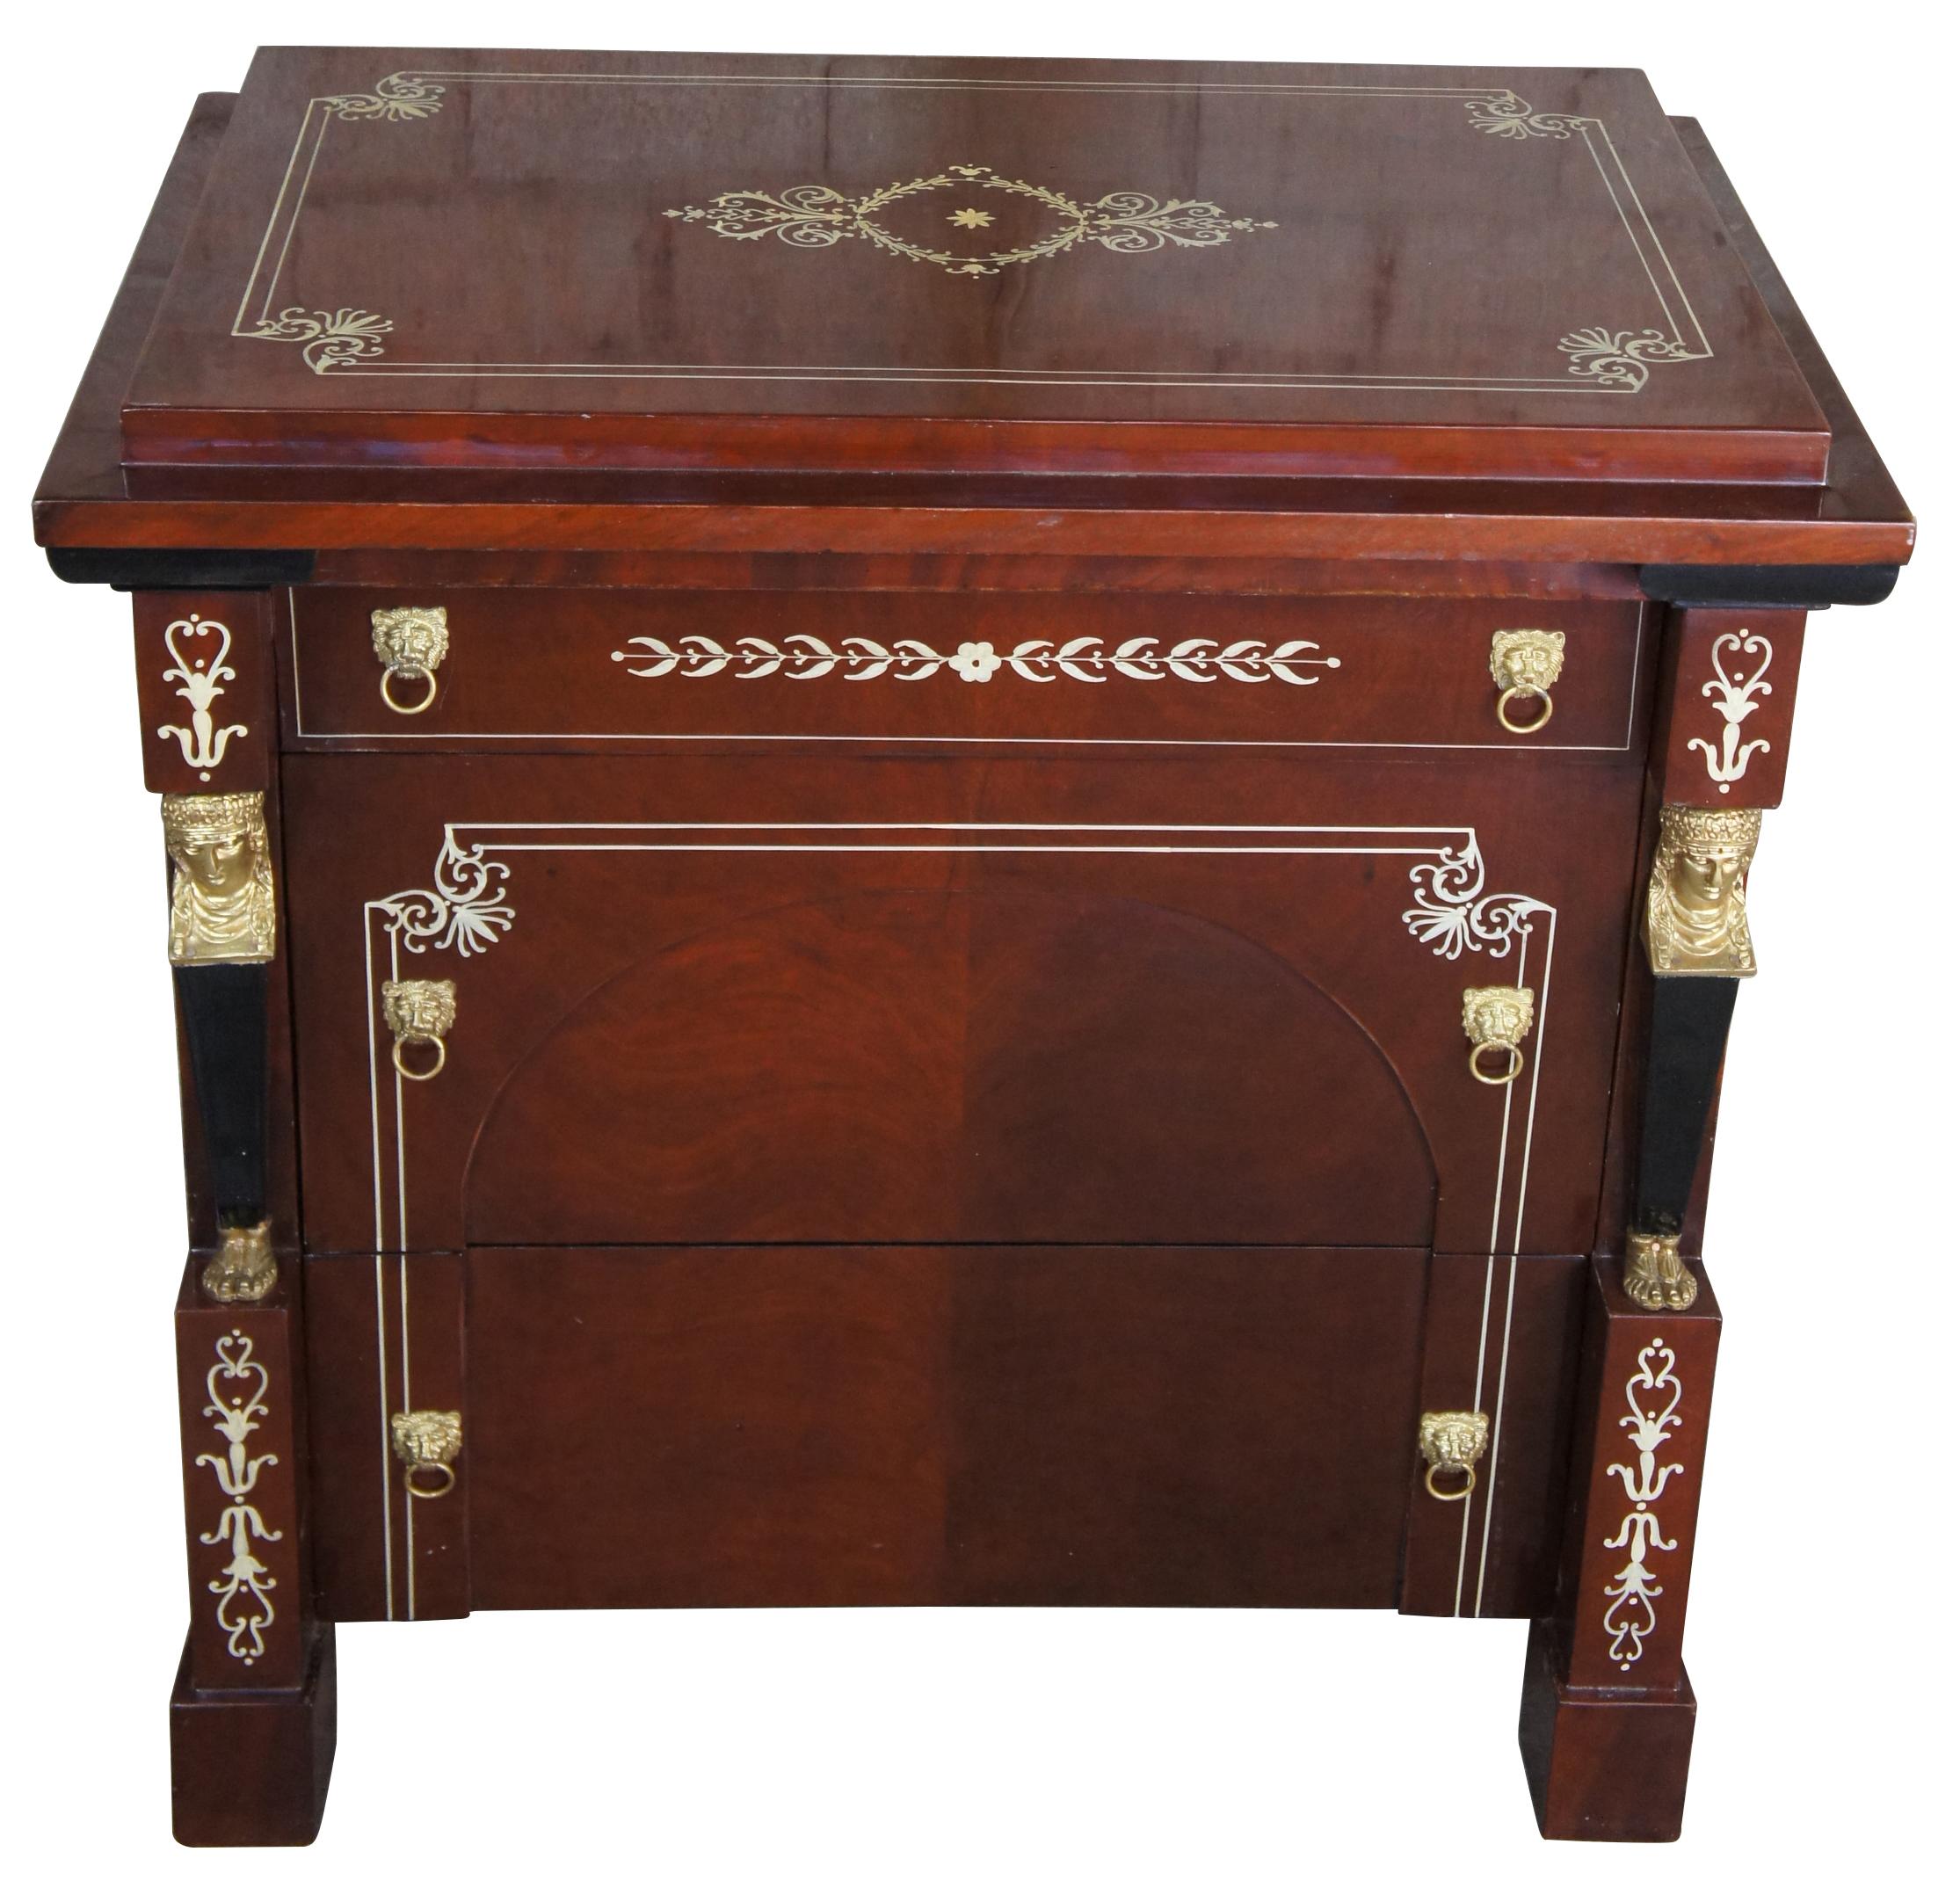 French Empire style Egyptian revival 3 drawer chest side table nightstand Art Deco

20th century Egyptian Revival three drawer chest. Made from mahogany with figural mounts and lion knocker drawer pulls. Features a blend of French and Art Deco